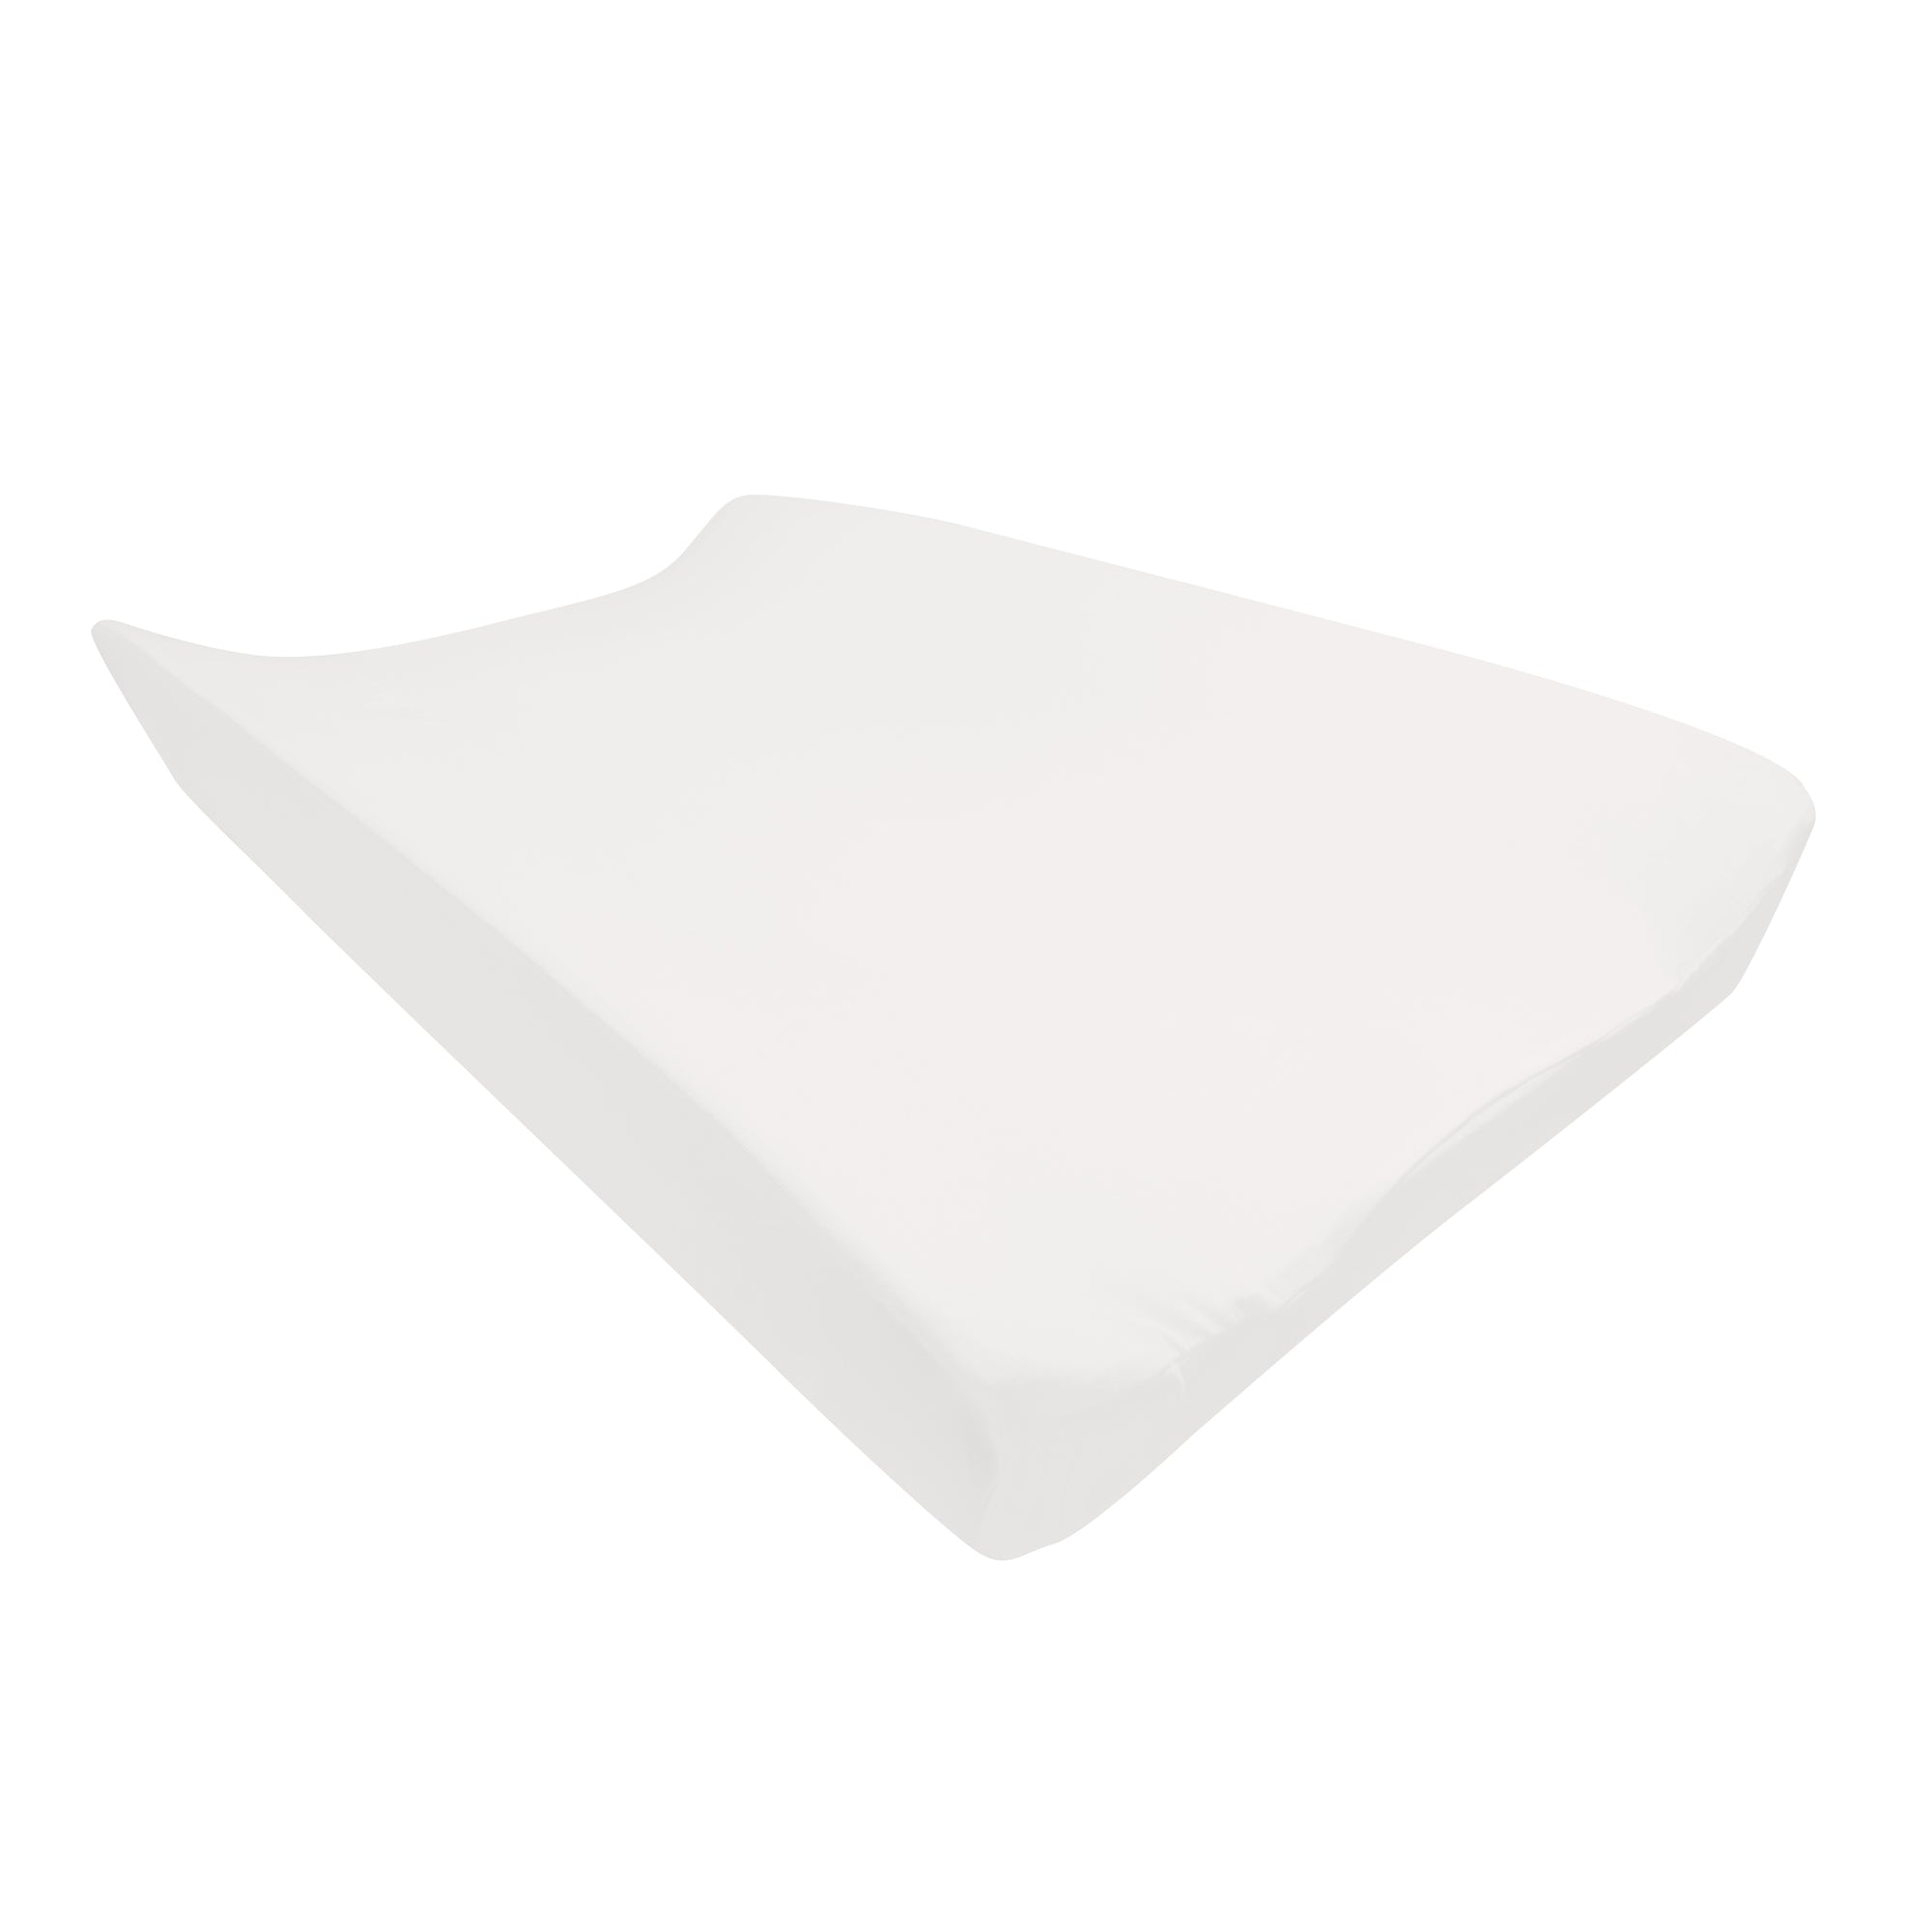 Kyte BABY Change Pad Cover Cloud / One Size Change Pad Cover in Cloud